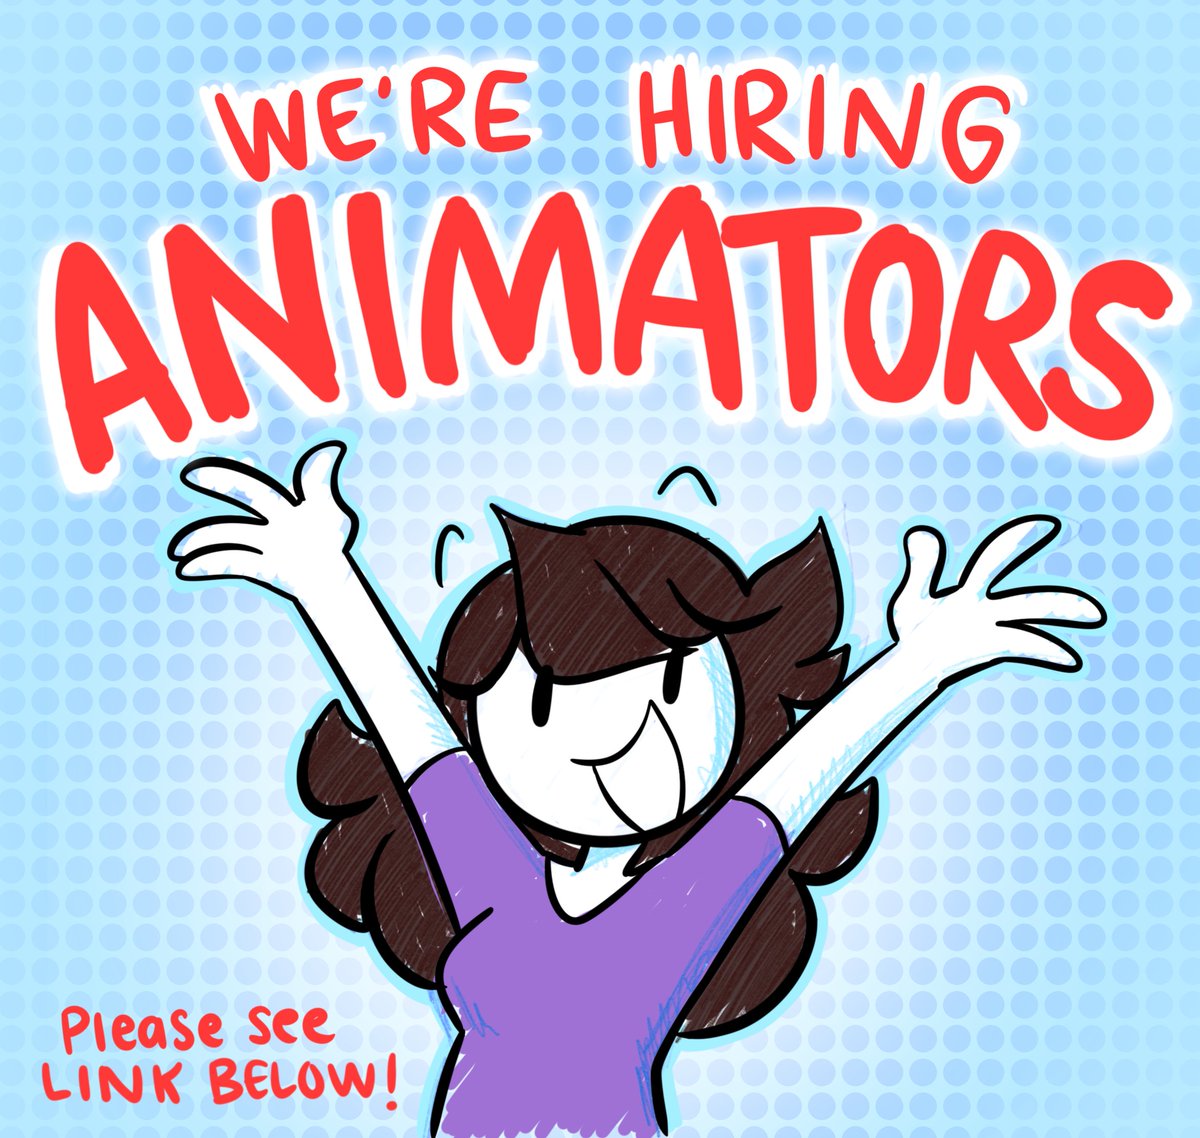 Hello #PortfolioDay Animators!

After seeing so many incredibly talented animators being laid off lately we've decided to start hiring! If you're interested in a position please submit an application using the link below :)

We're excited to onboard new artists thank you so much!